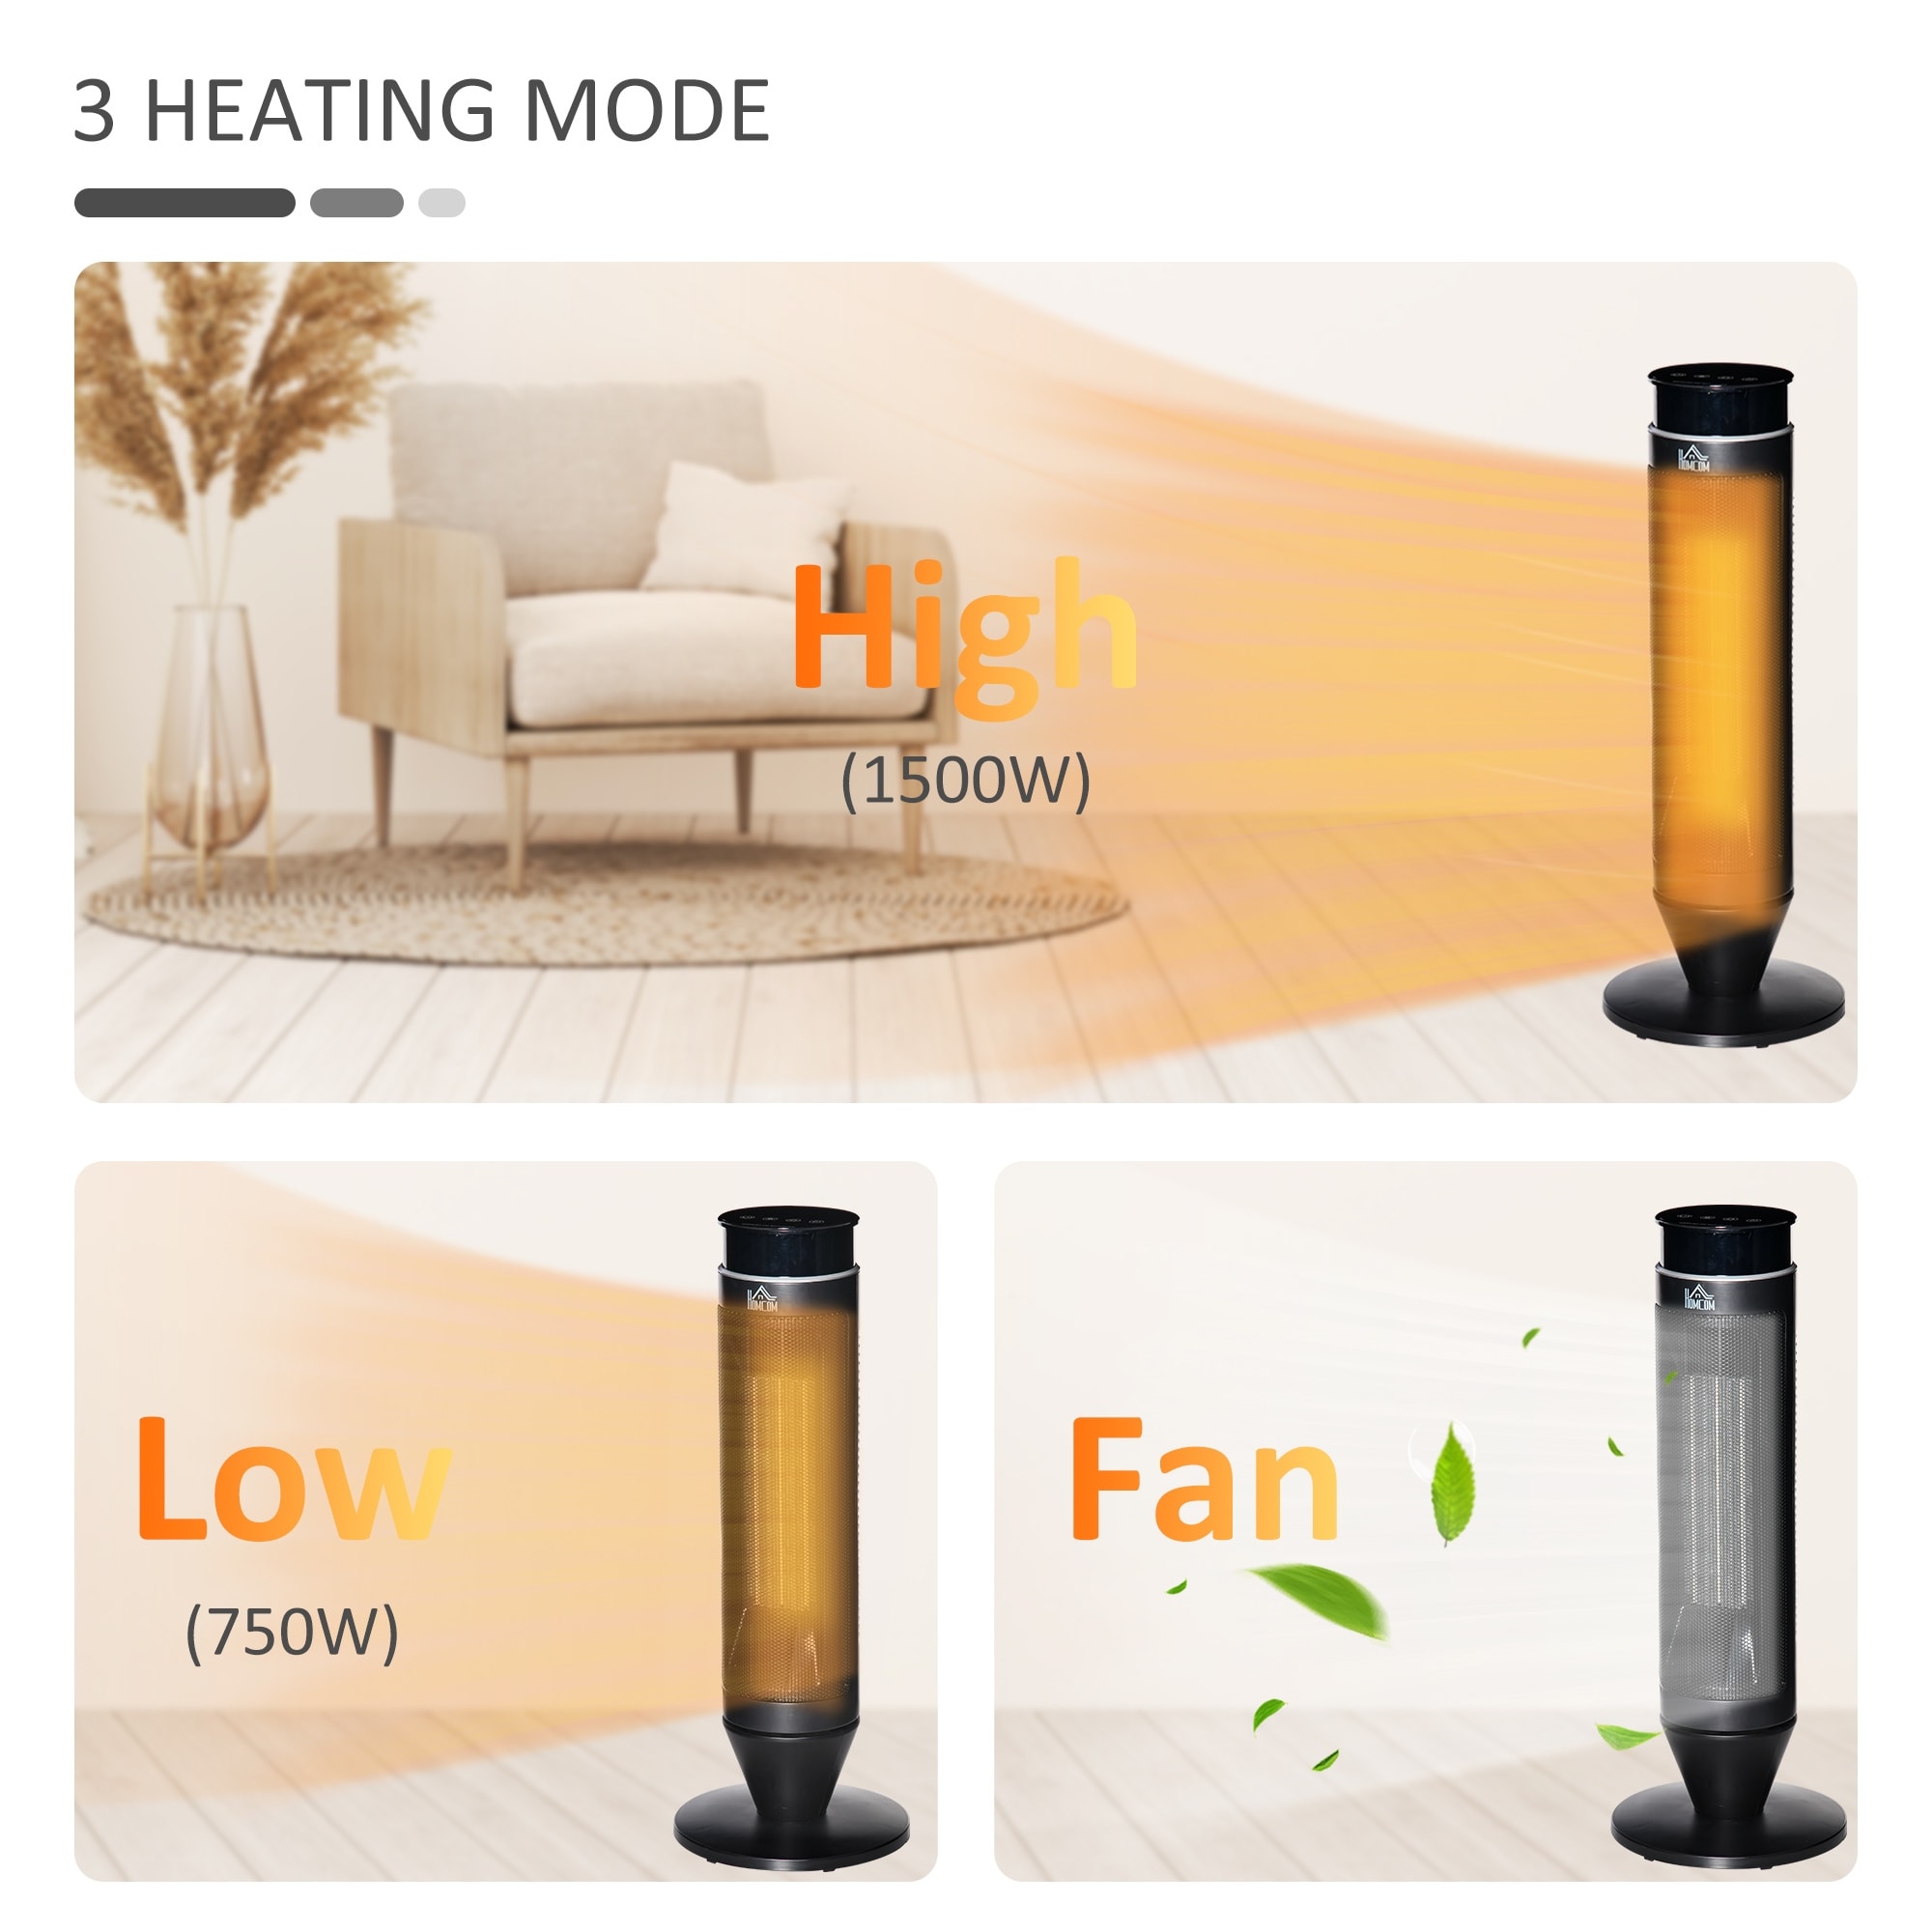 https://ak1.ostkcdn.com/images/products/is/images/direct/9ecdb0ae11067b604daf78bac88de47b634b8d21/HOMCOM-Tower-Fan%2C-Electric-Space-Heater-with-Oscillation%2C-Remote-Control%2C-8H-Timer%2C-and-Overheating-Protection%2C-750W---1500W.jpg